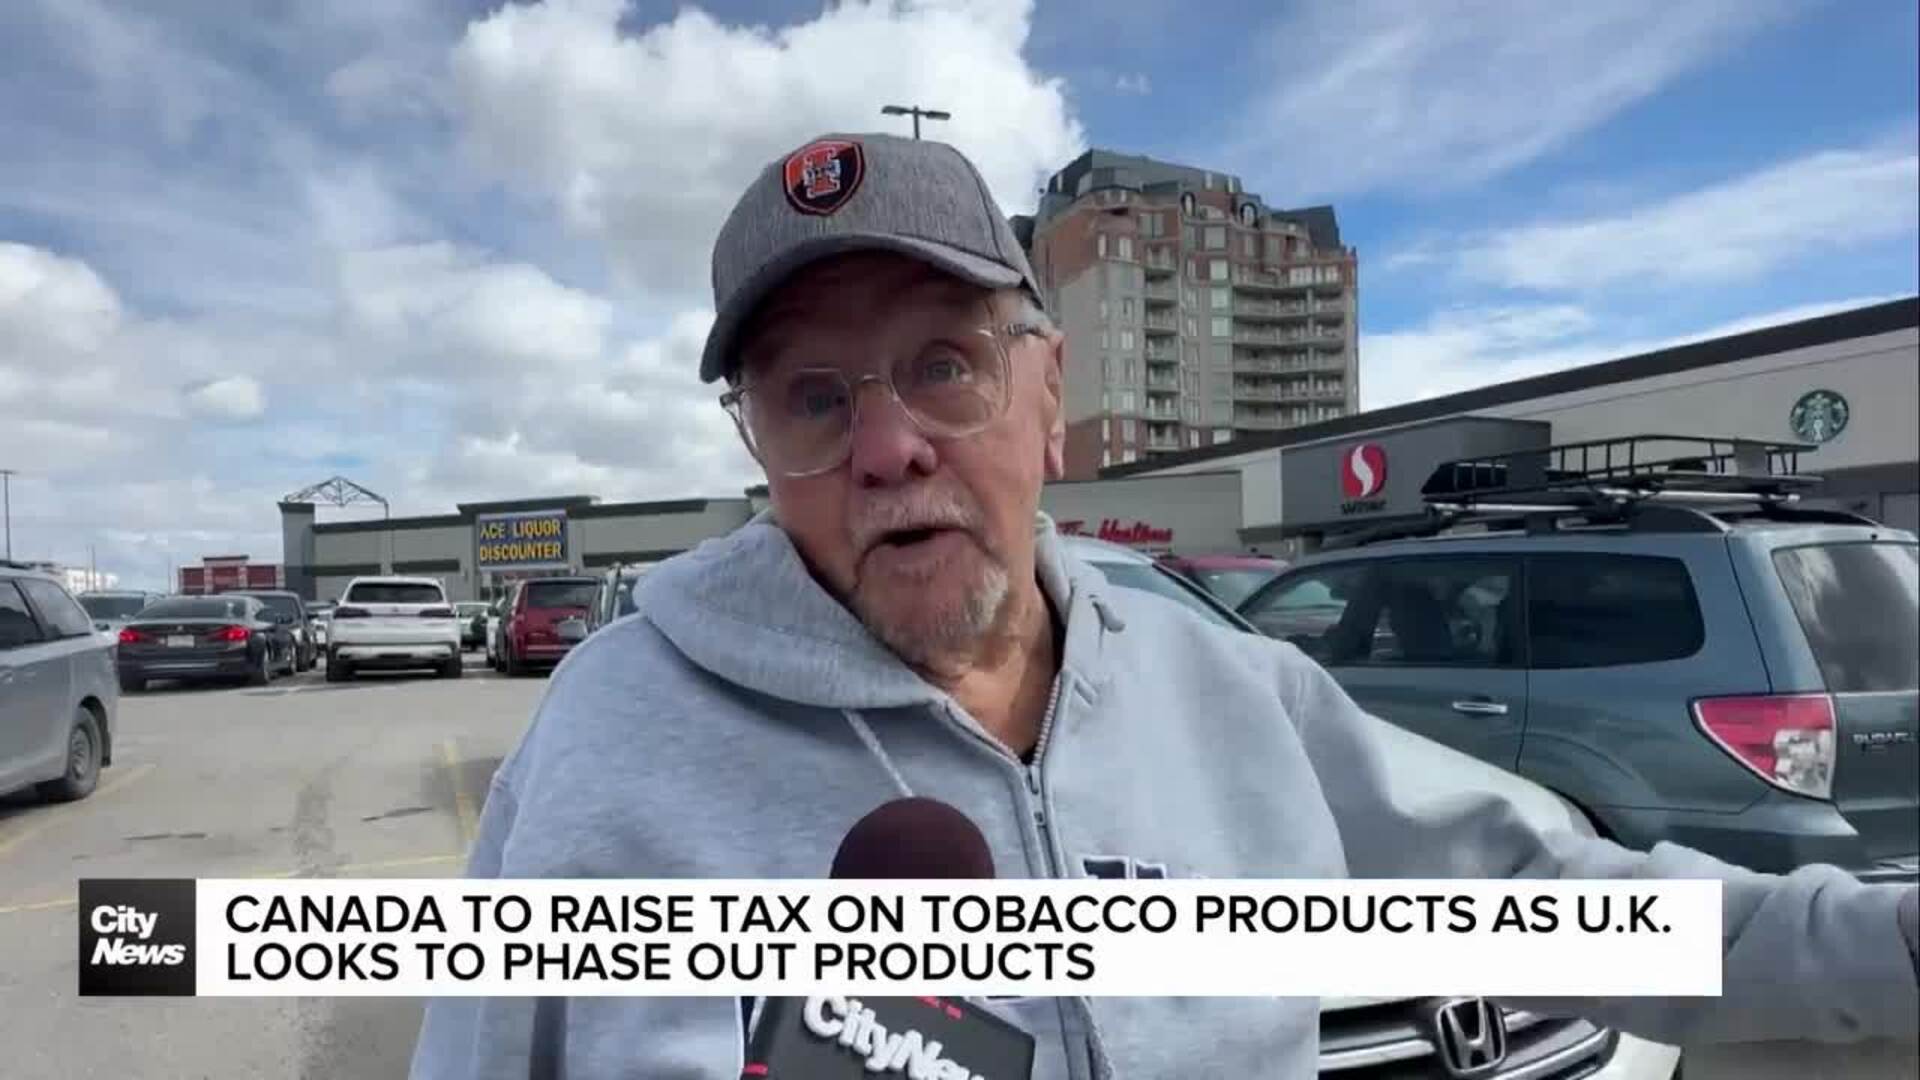 Canada to raise tax on tobacco, vapes